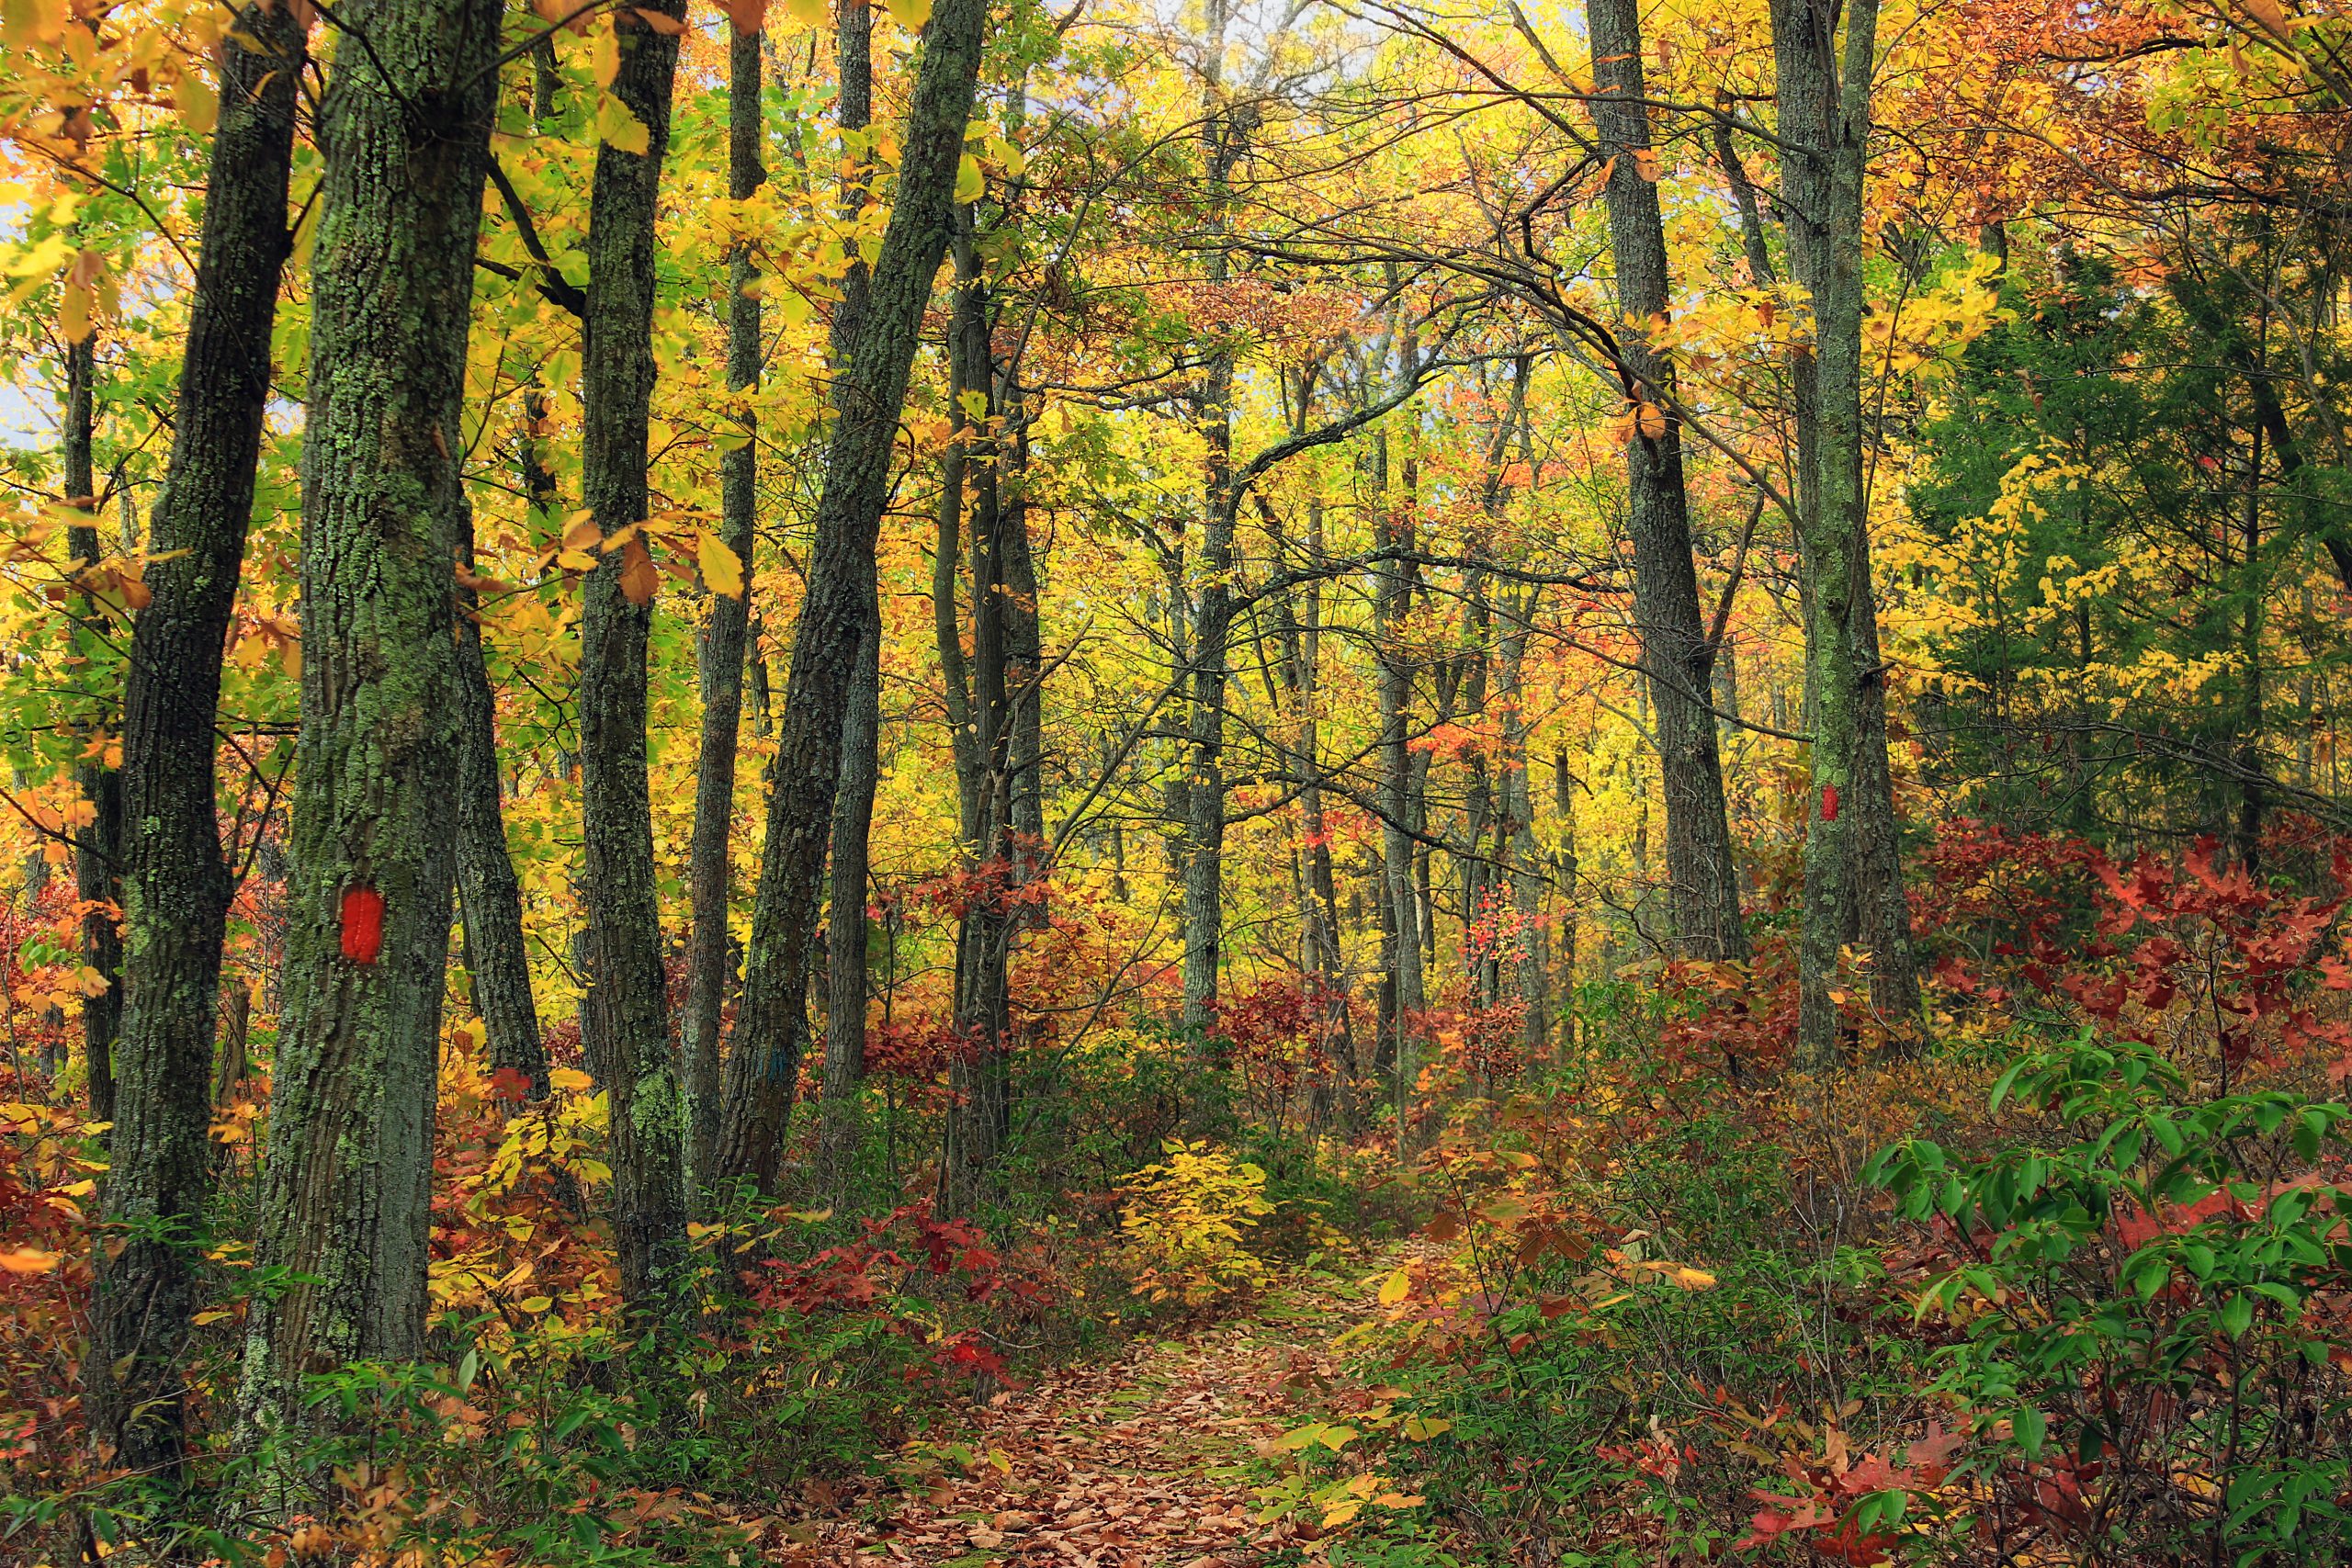 This picture shows a winding path in a deciduous forest.